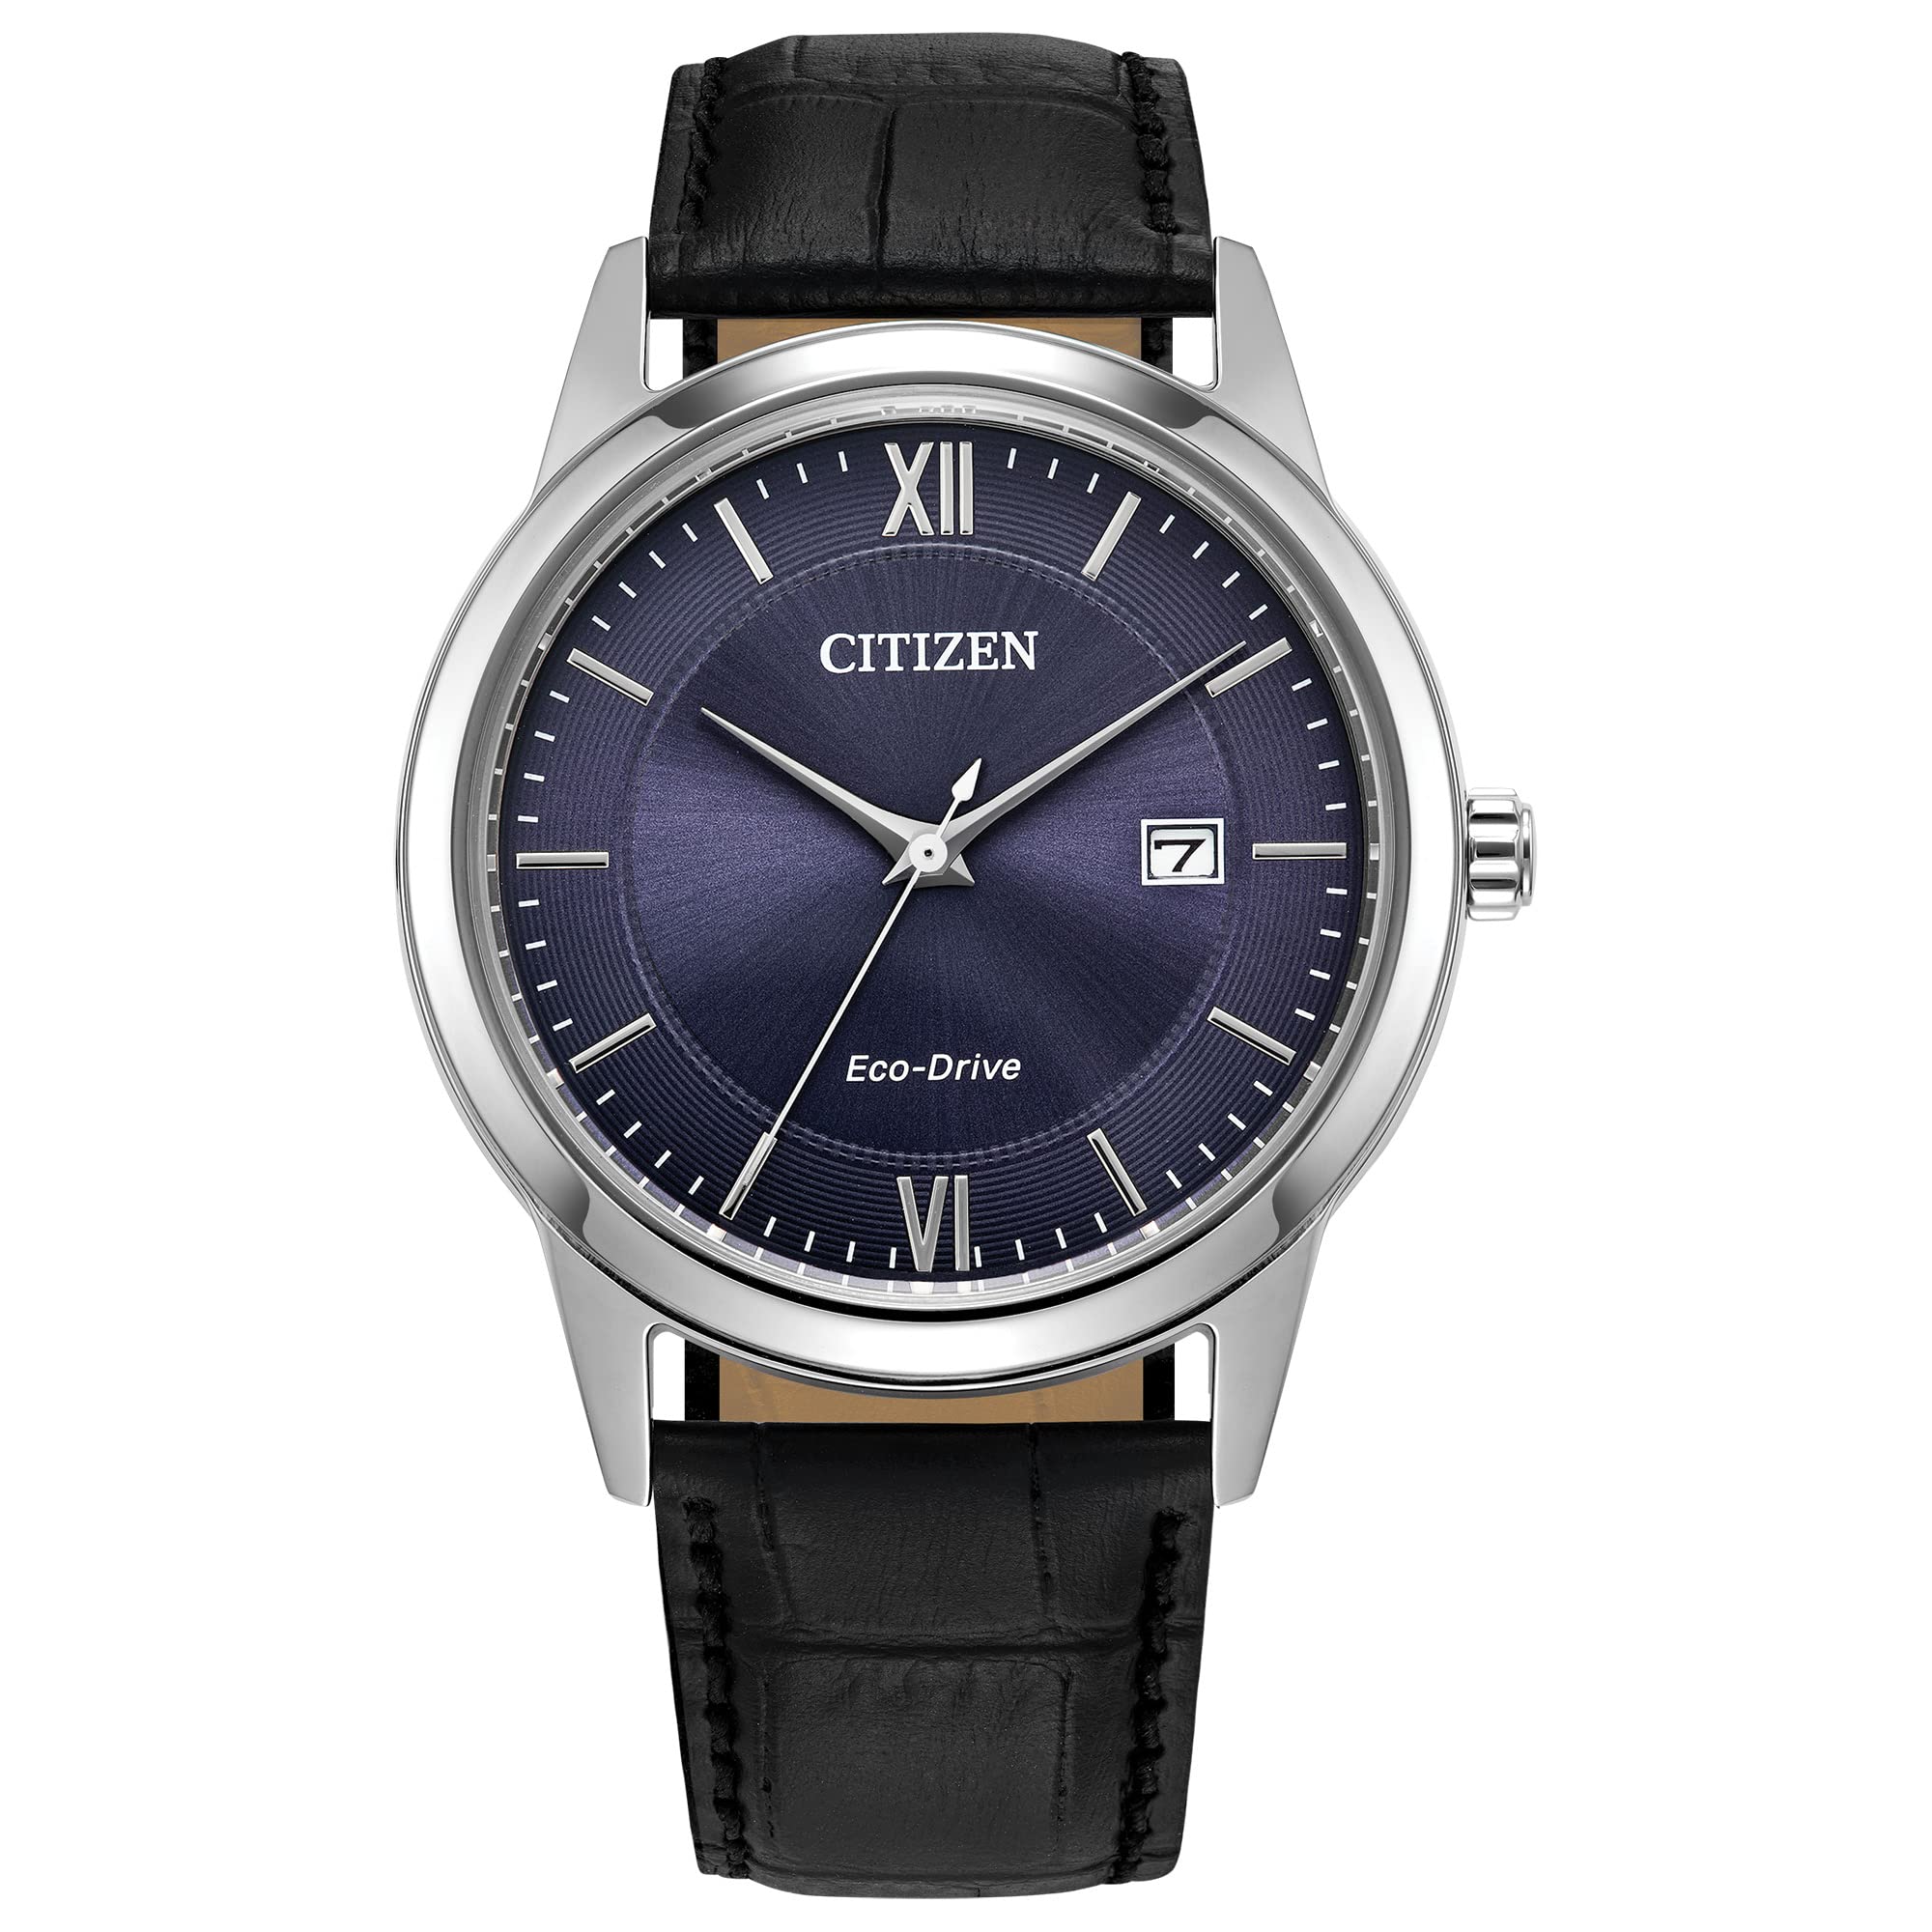 Citizen Men's Classic Eco-Drive Leather Strap Watch, 3-Hand Date